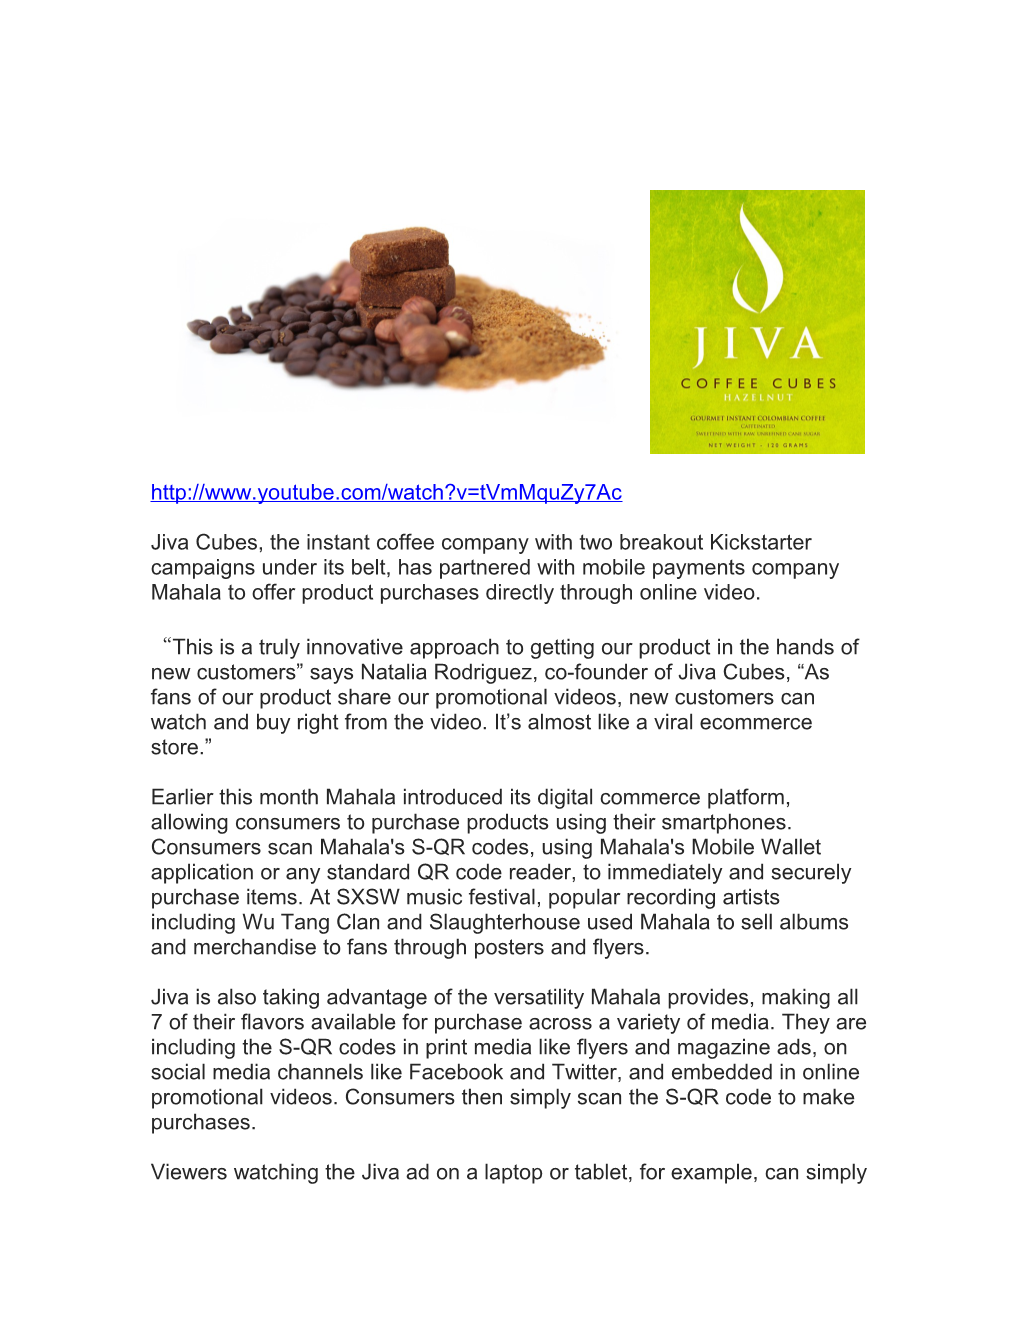 Jiva Cubes, the Instant Coffee Company with Two Breakout Kickstarter Campaigns Under Its